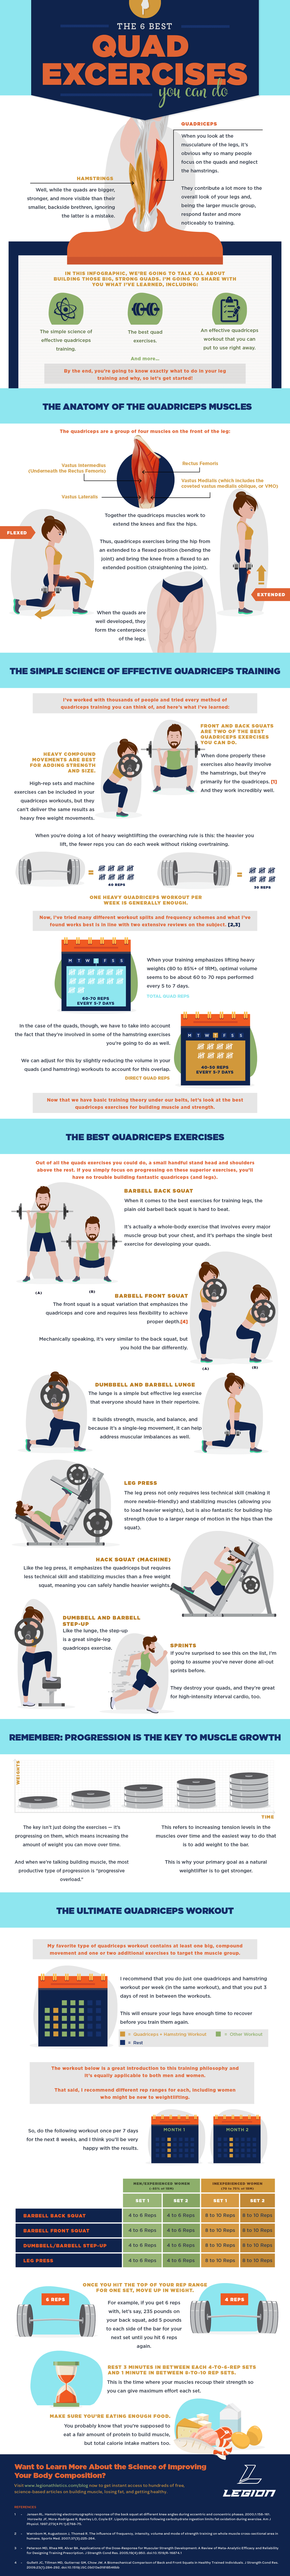 [INFOGRAPHIC] The 6 Absolute Best Quads Exercises You Can Do